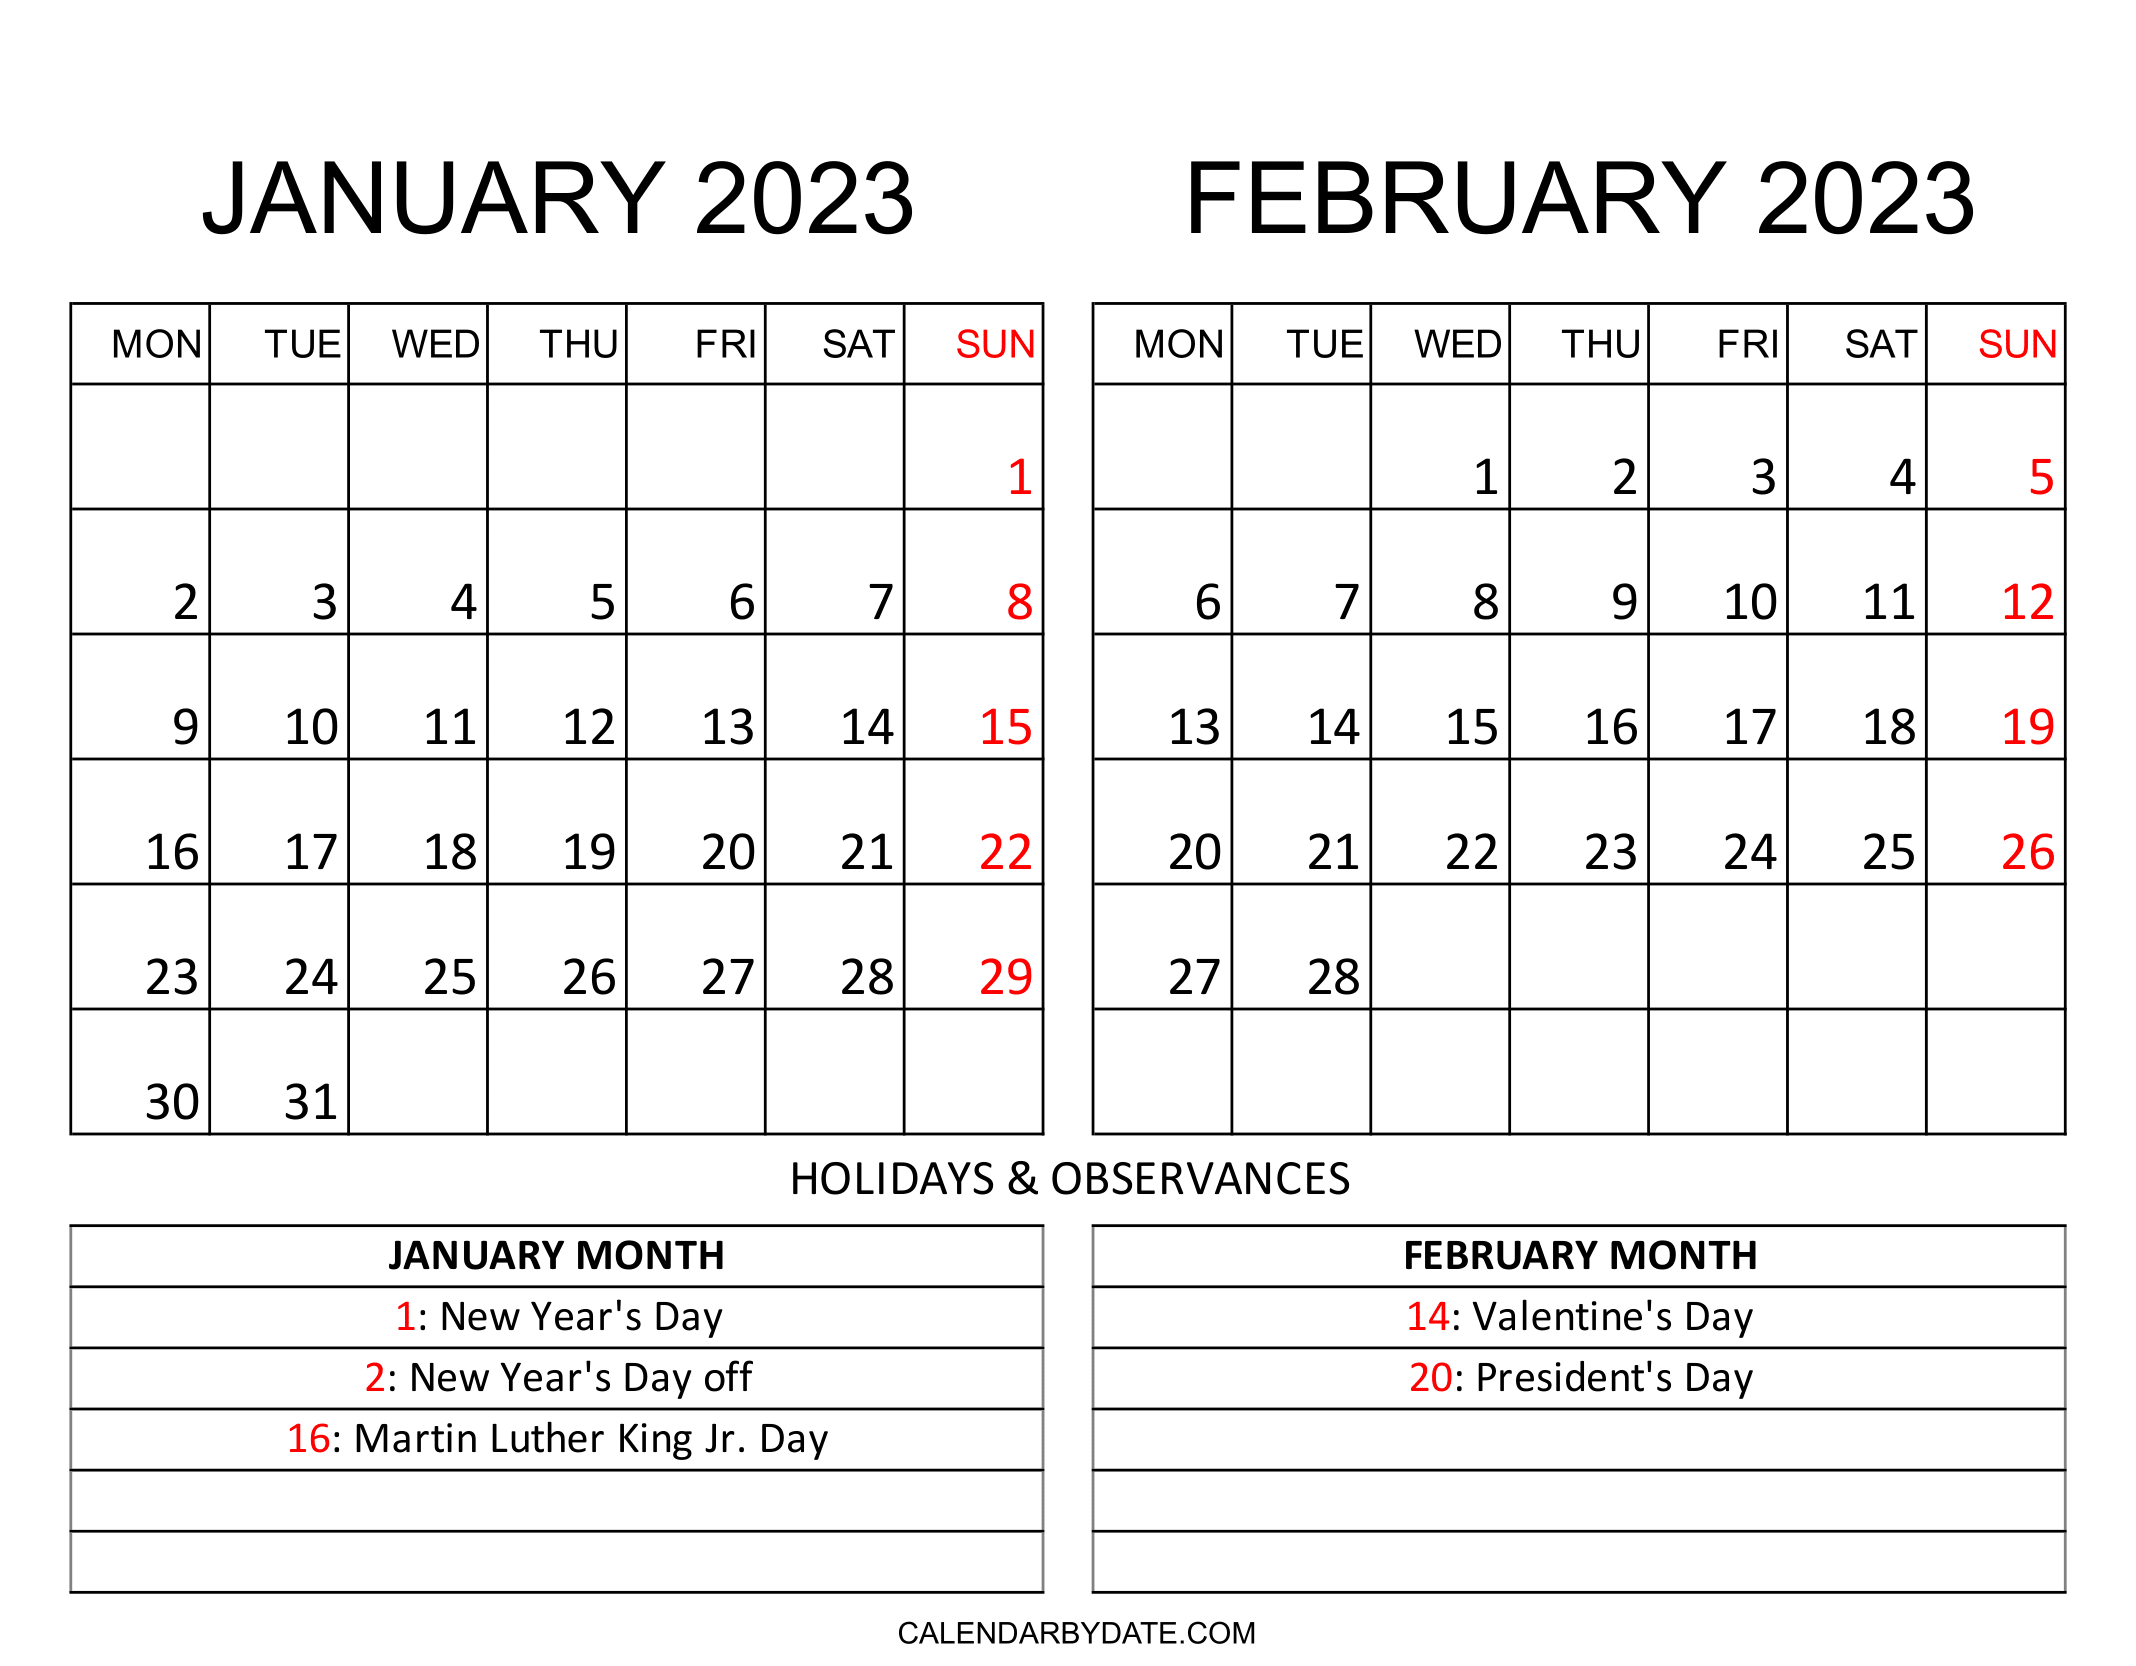 On one page, there is a two-month January and February 2023 calendar template with a list of US federal holidays and observances.